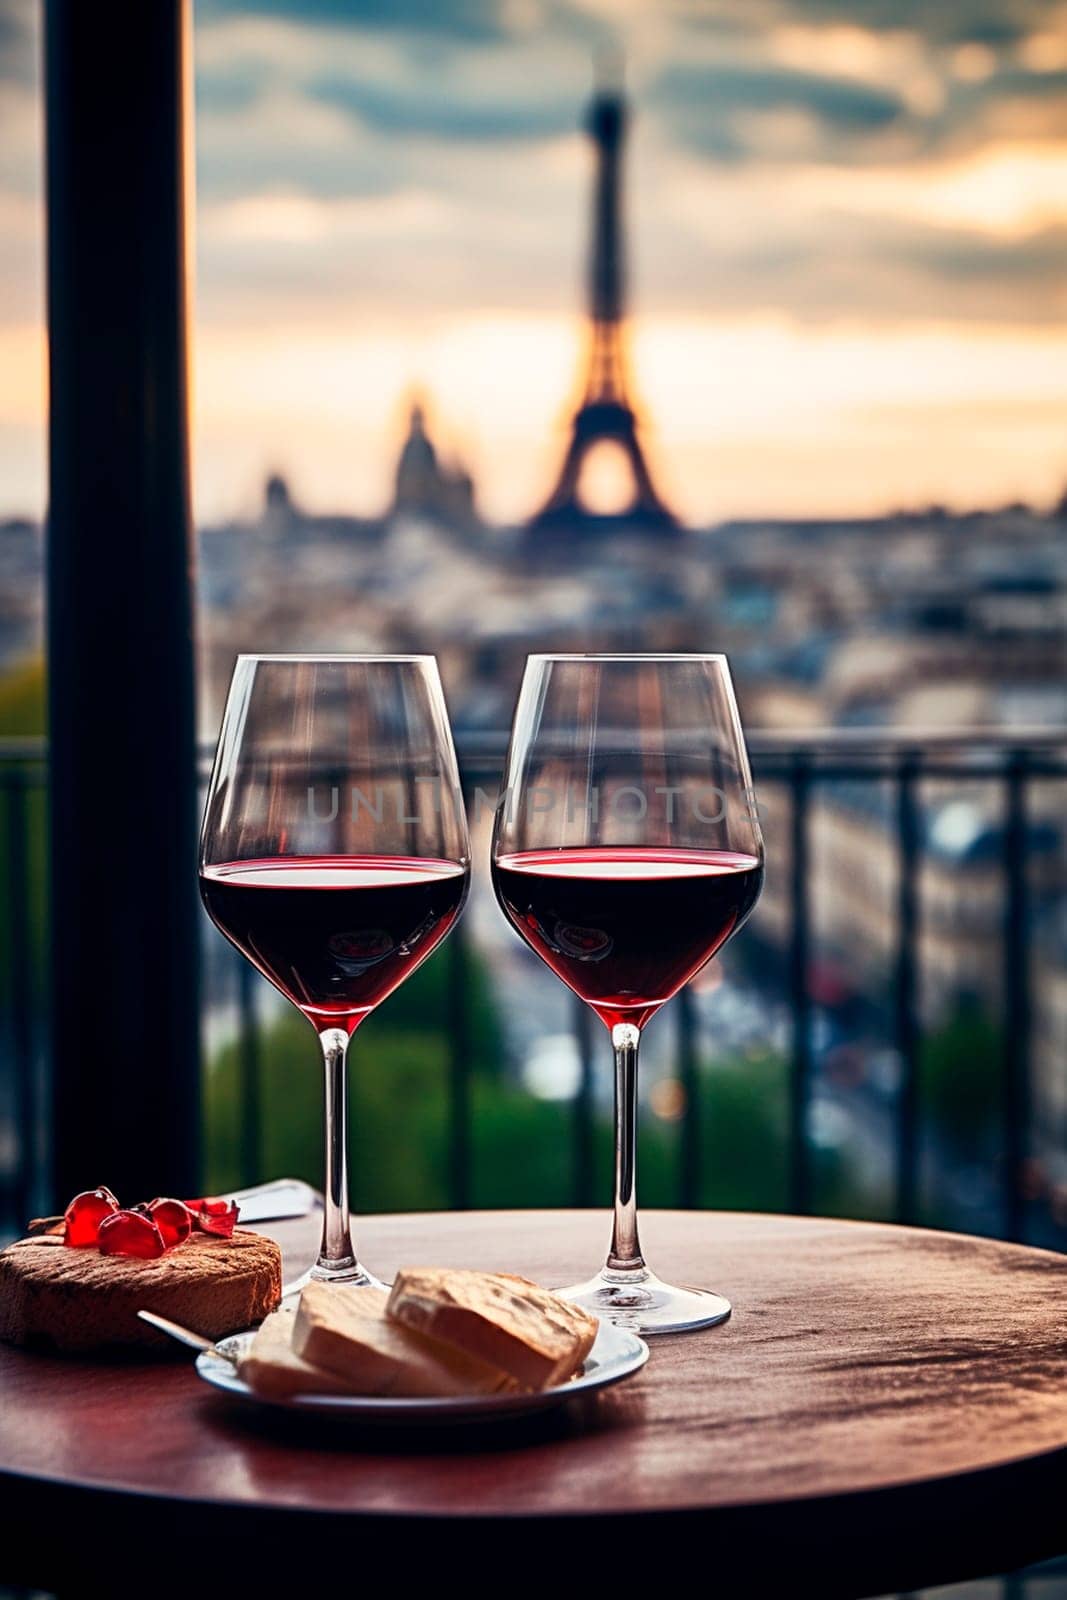 Glasses of wine against the backdrop of the Eiffel Tower. Selective focus. Travel.